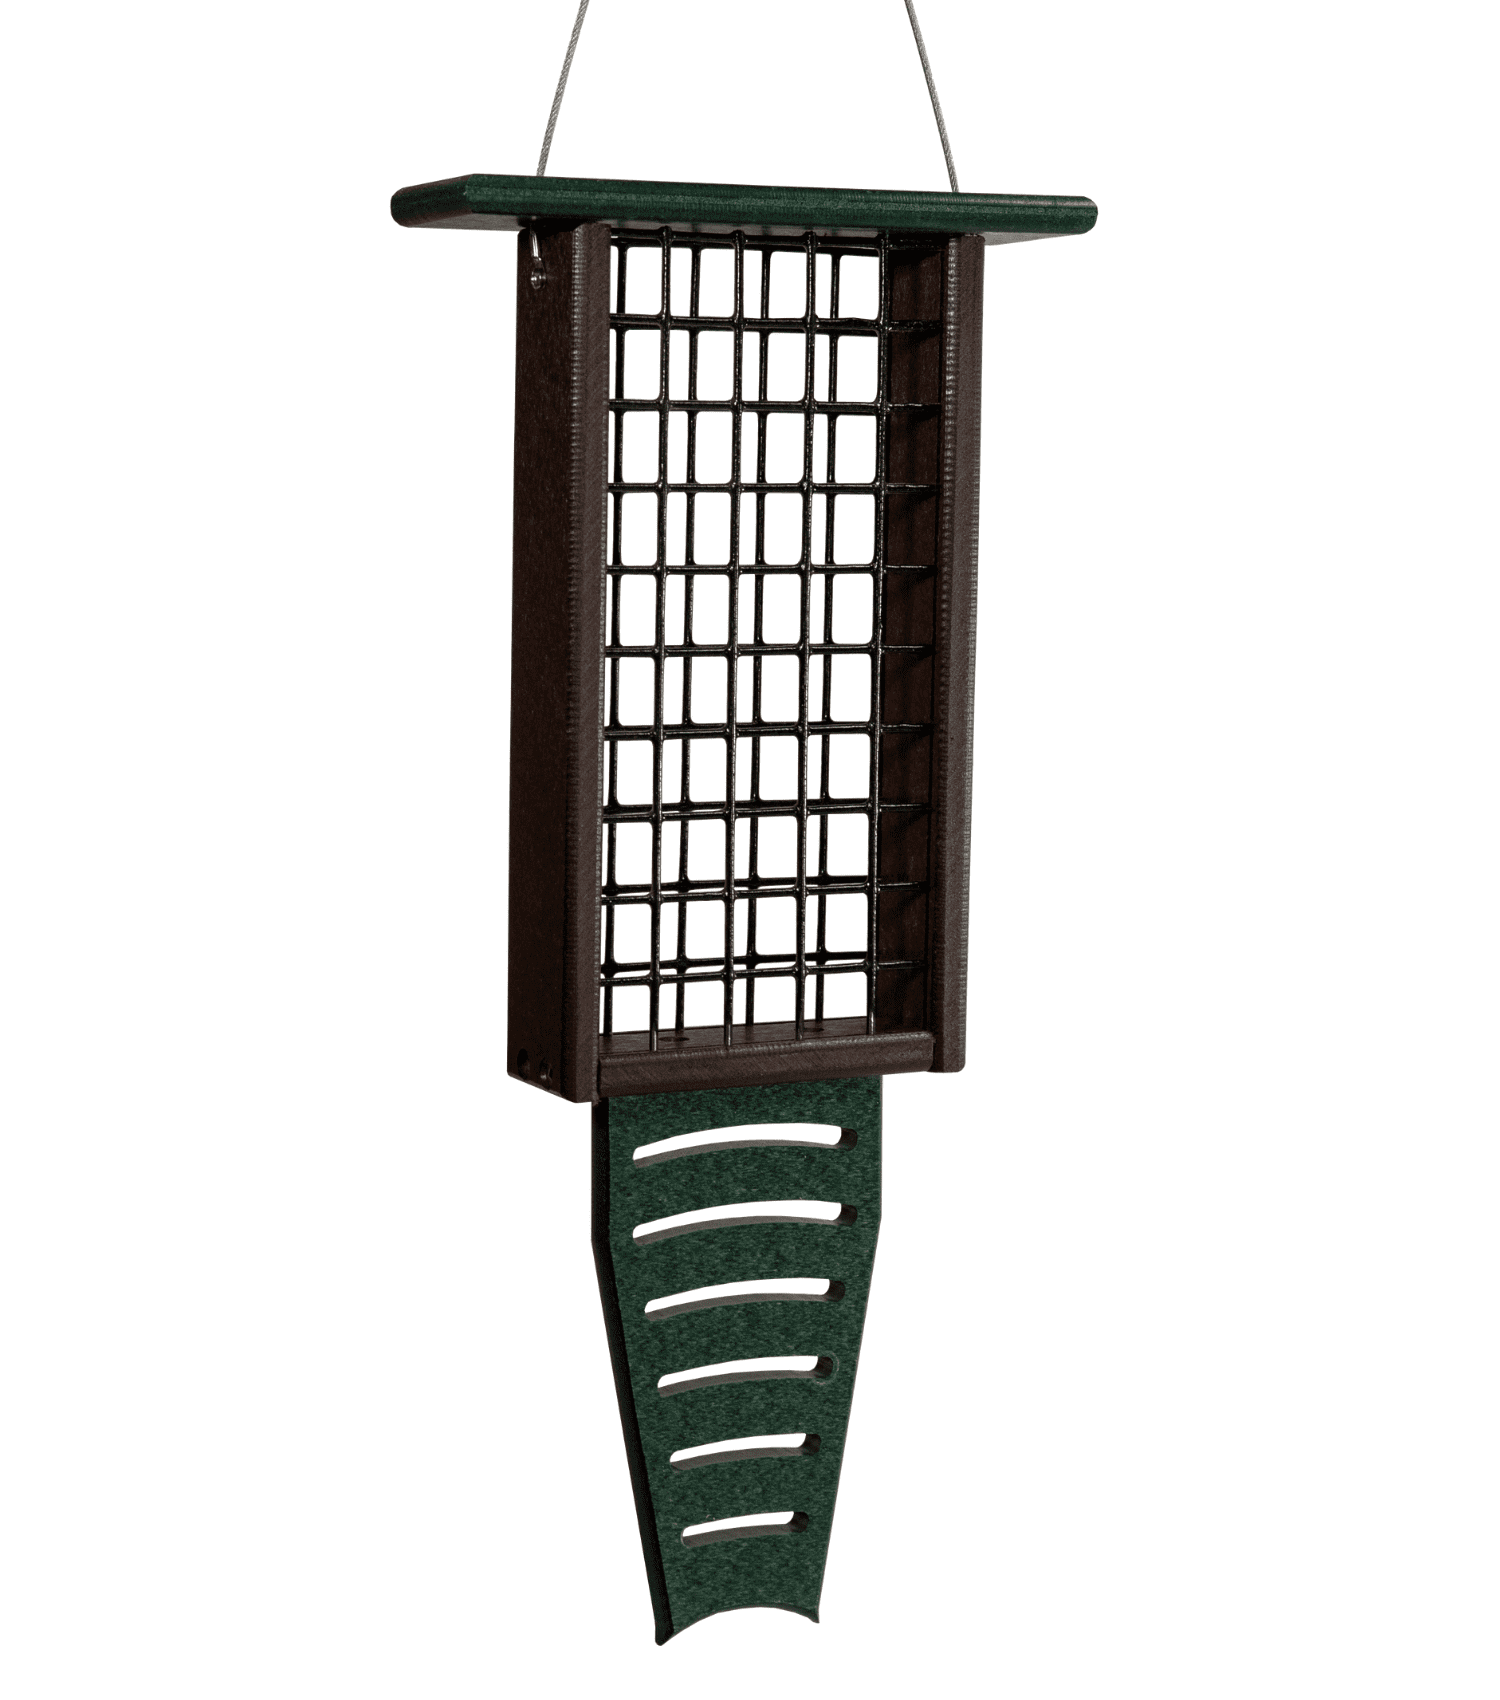 JCs Wildlife Recycled Upside Down Single Suet Feeder Brown W/ Cardinal Red Roof 